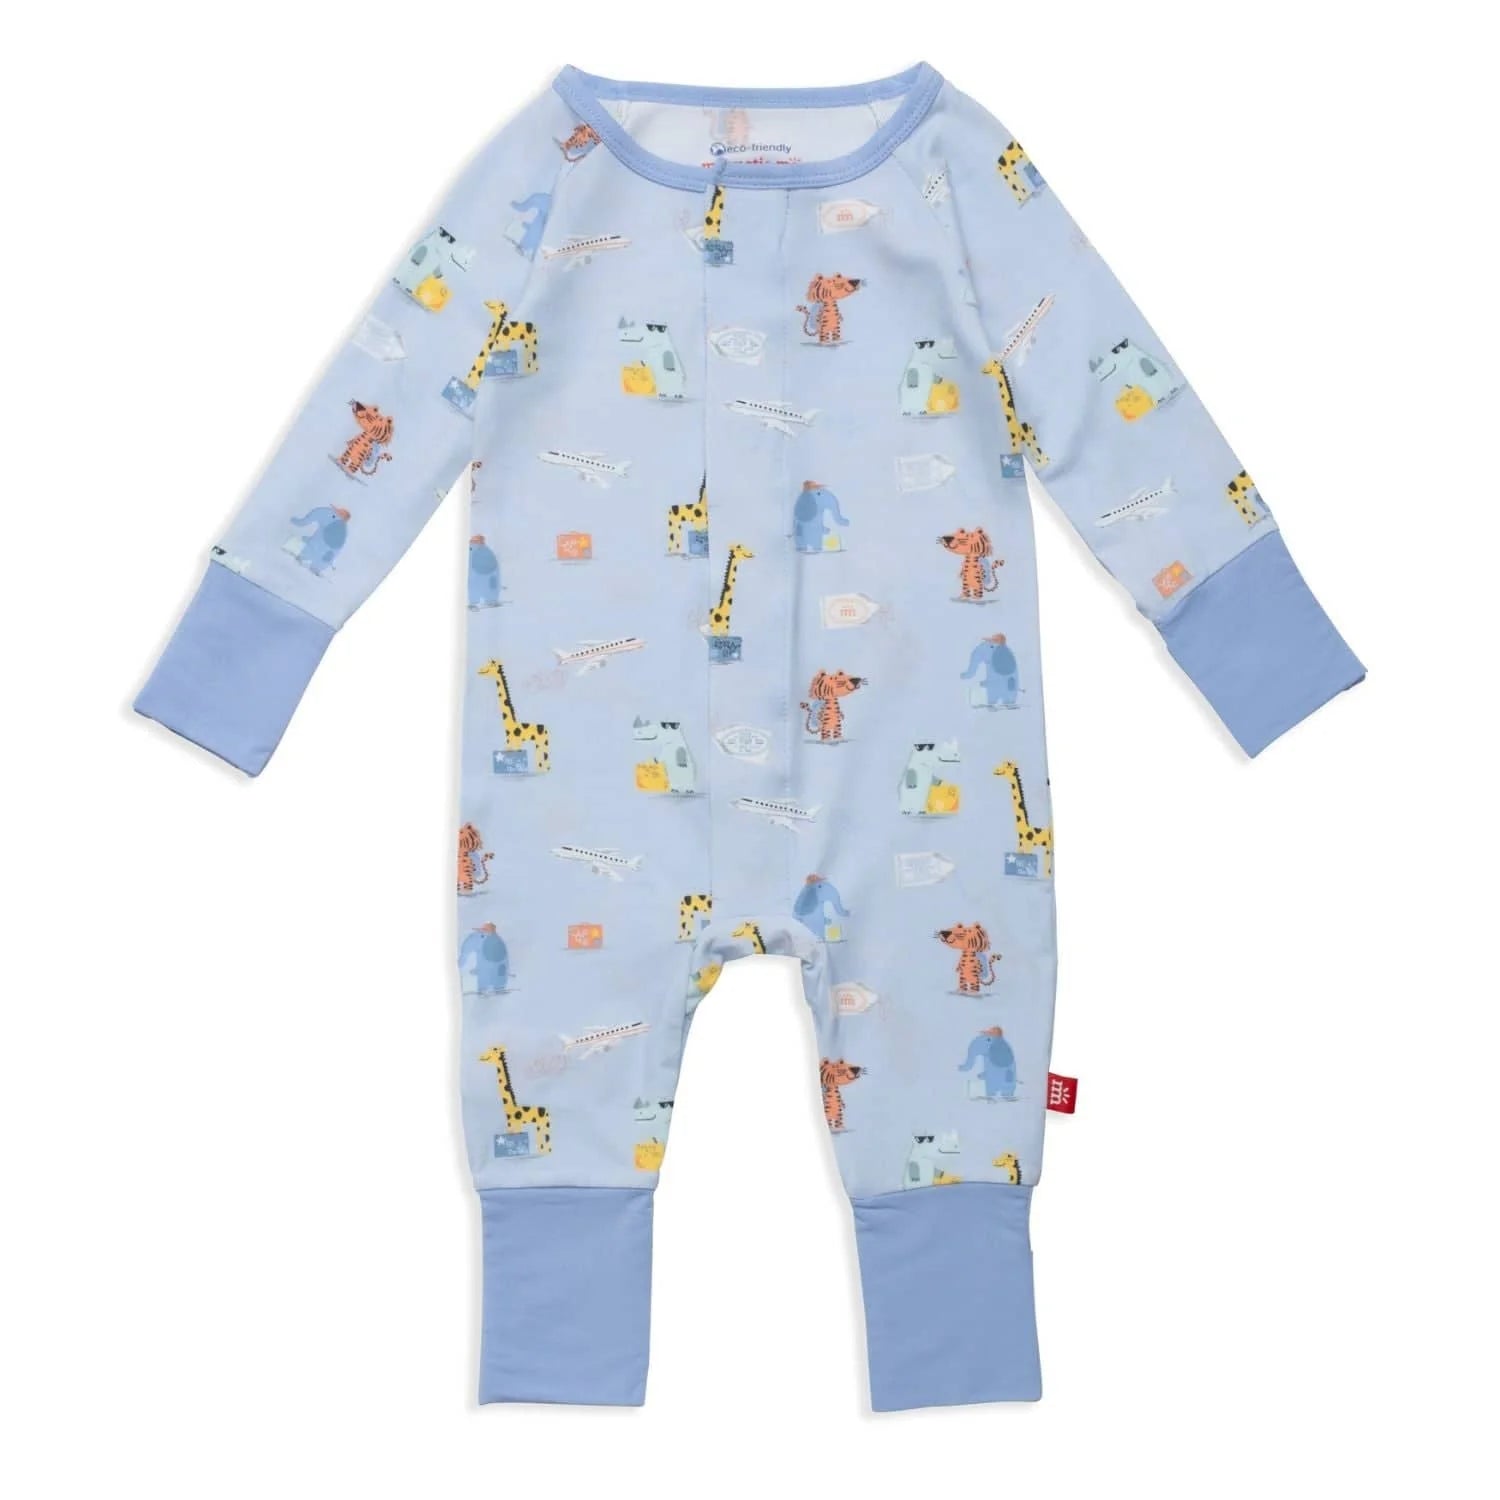 Magnetic footie ready jet go for baby boys